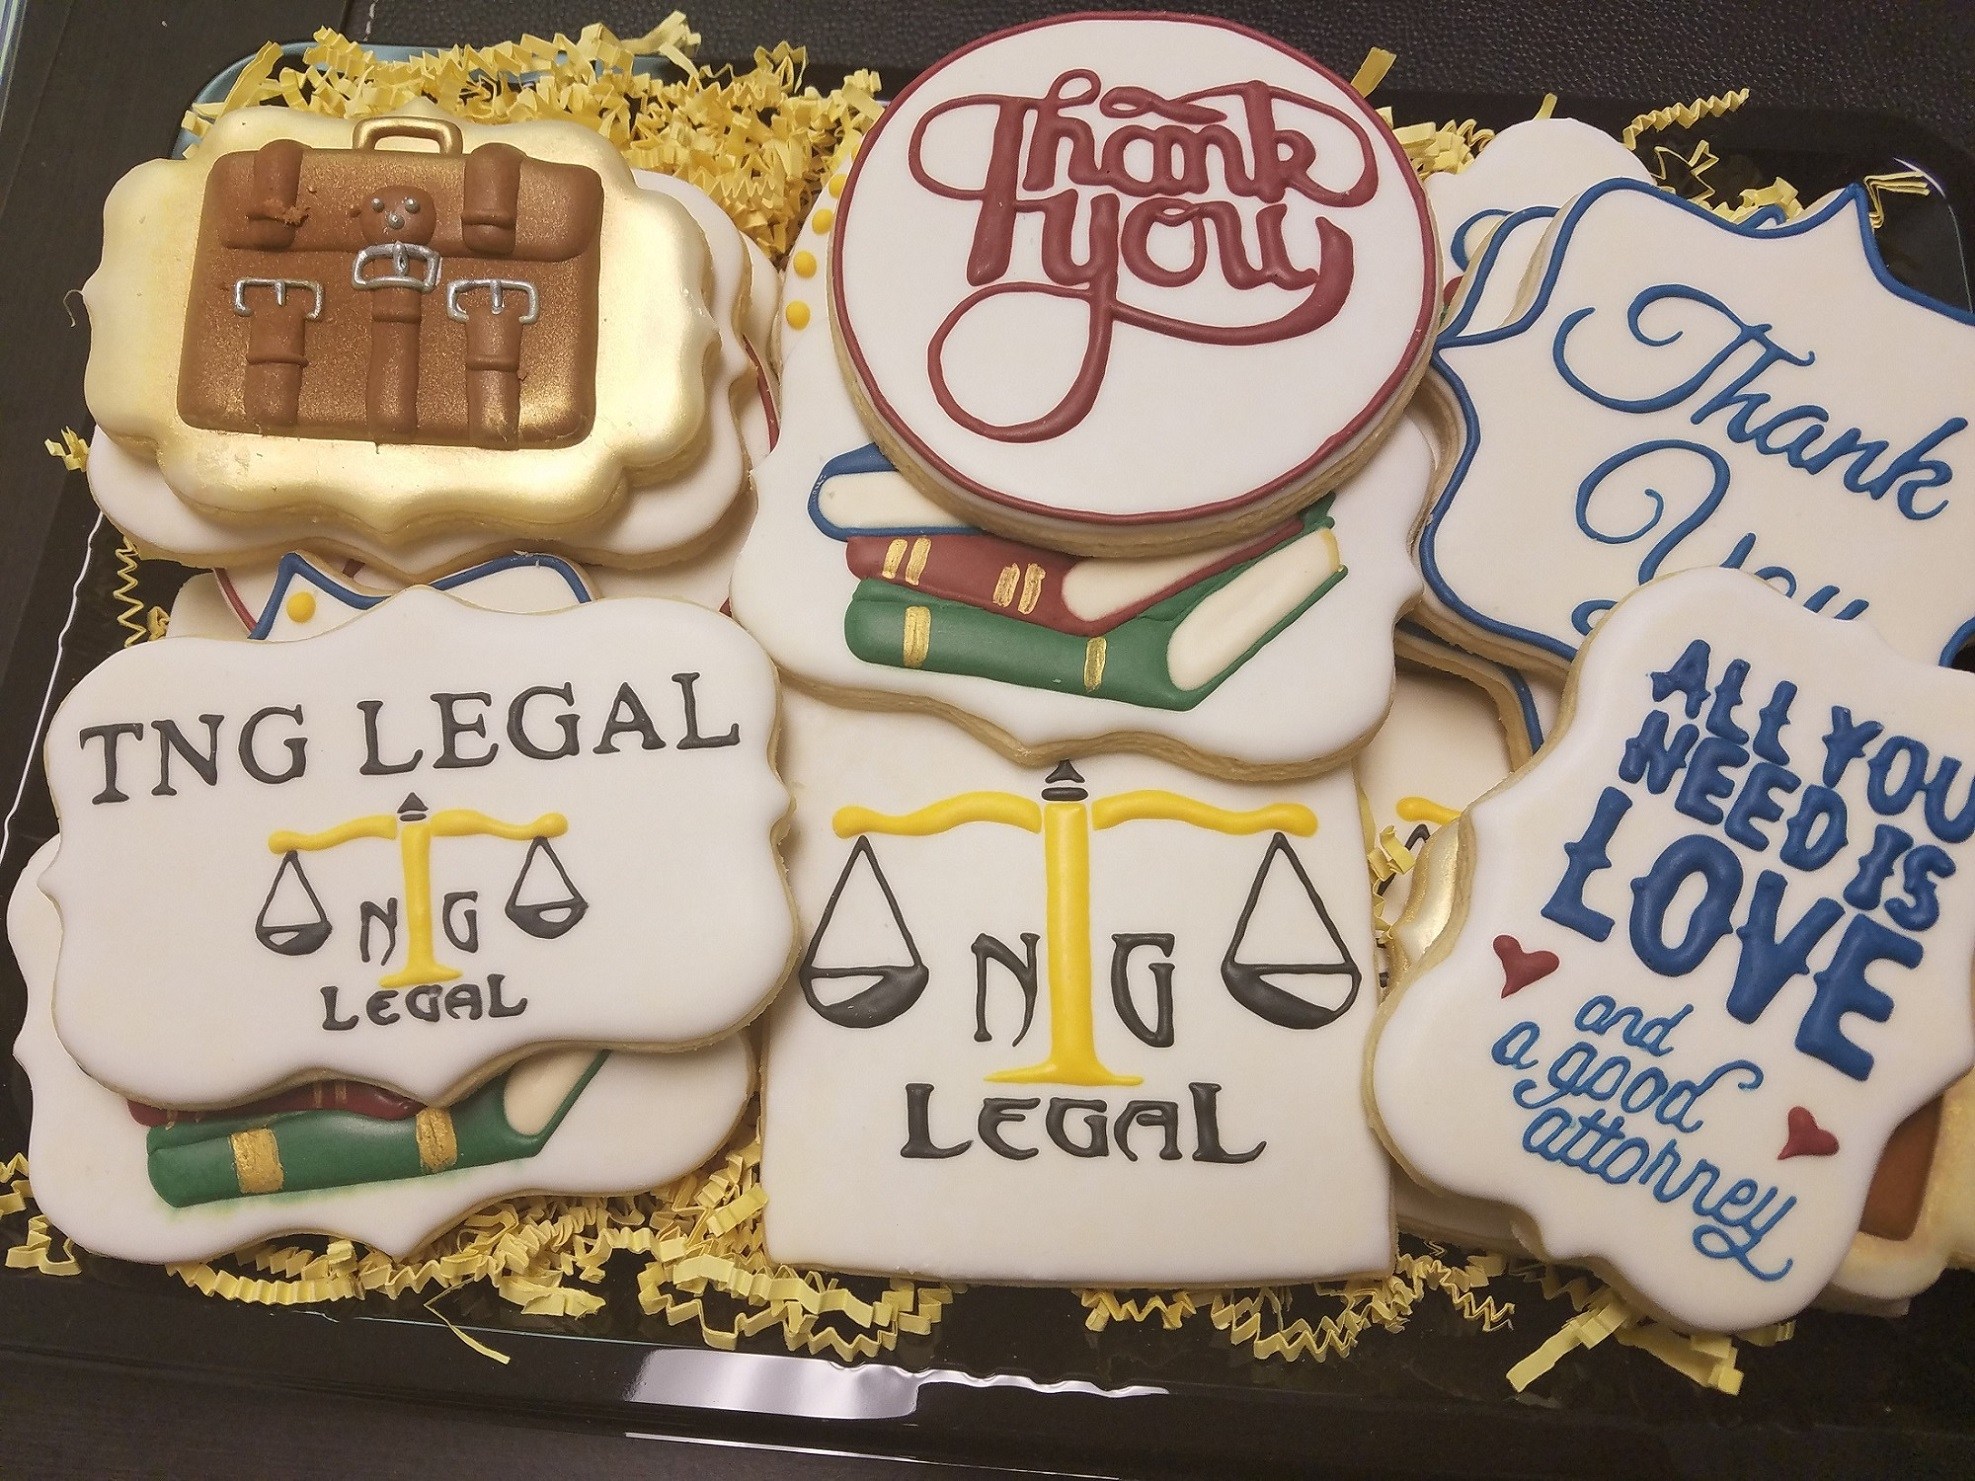 A picture of the cookies with TNG Legal Logo